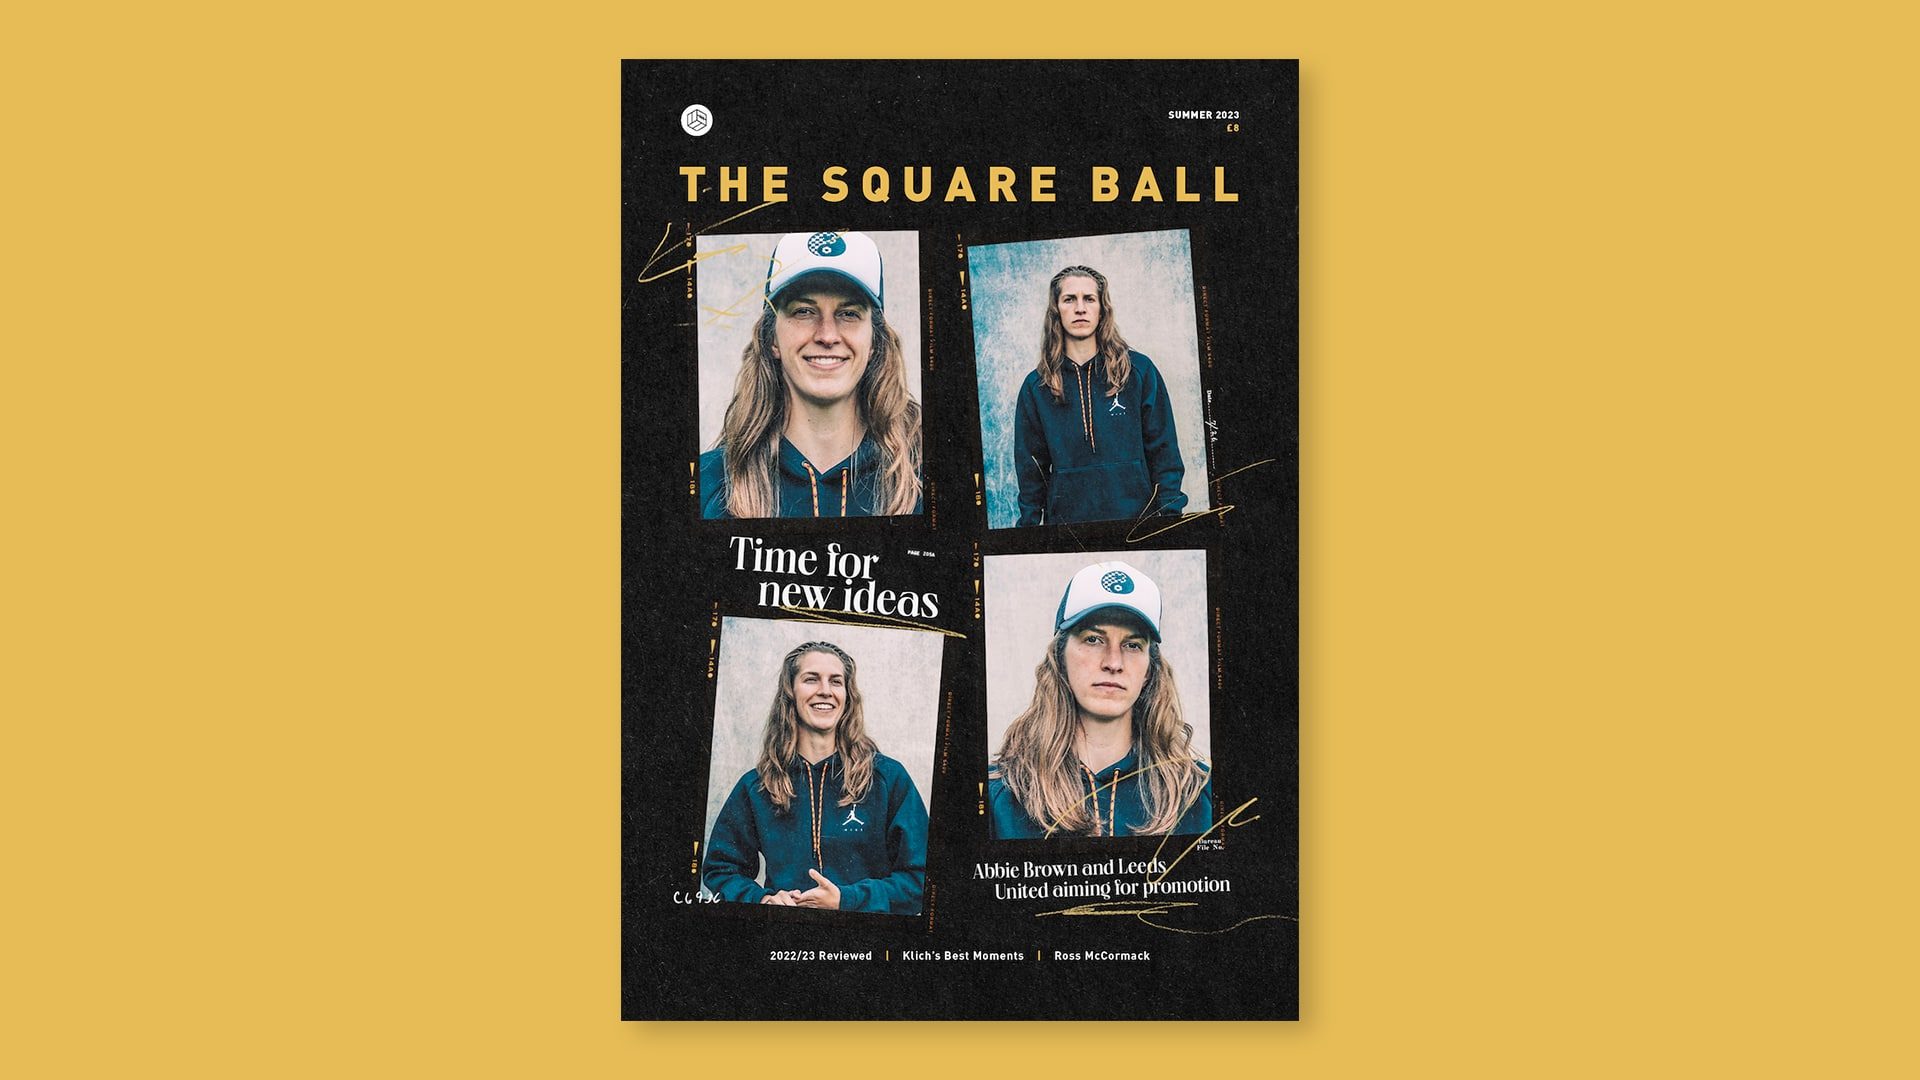 The cover of the TSB Summer Special 2023, featuring Abbie Brown of Leeds United Women photographed by Lee Brown